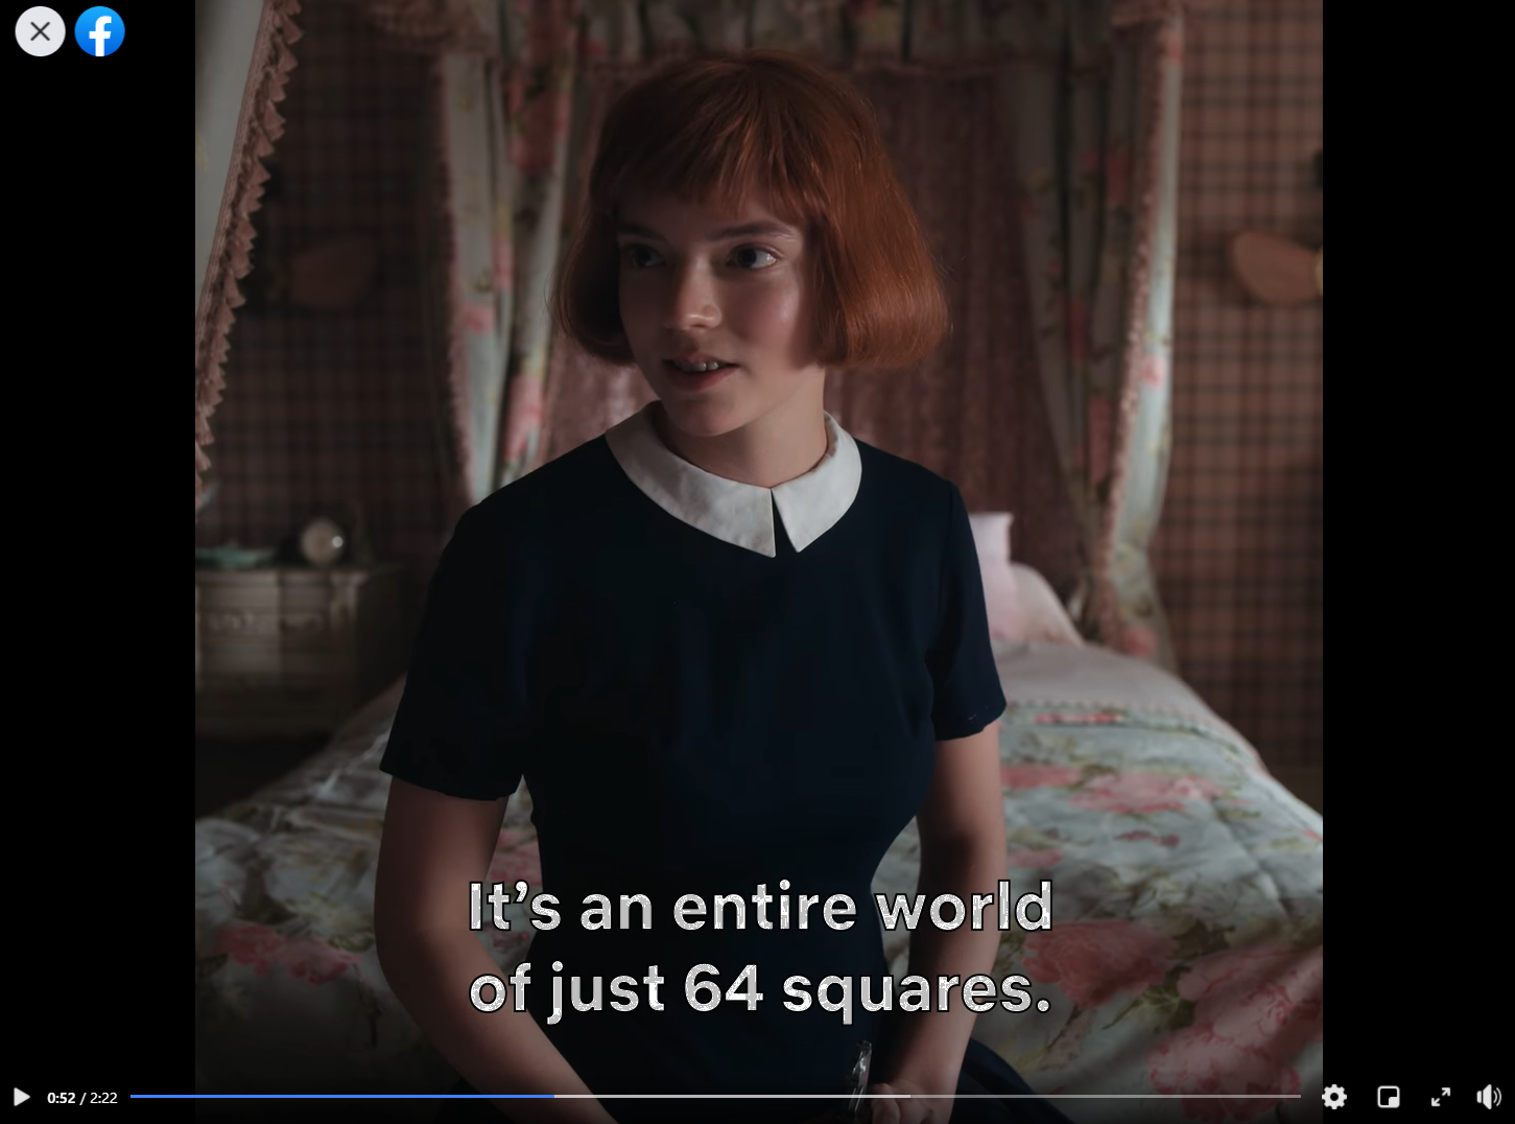 Facebook: Netflix’s miniseries “The Queen’s Gambit” keeps audiences engaged 
      via video snippets on Facebook.on Facebook.